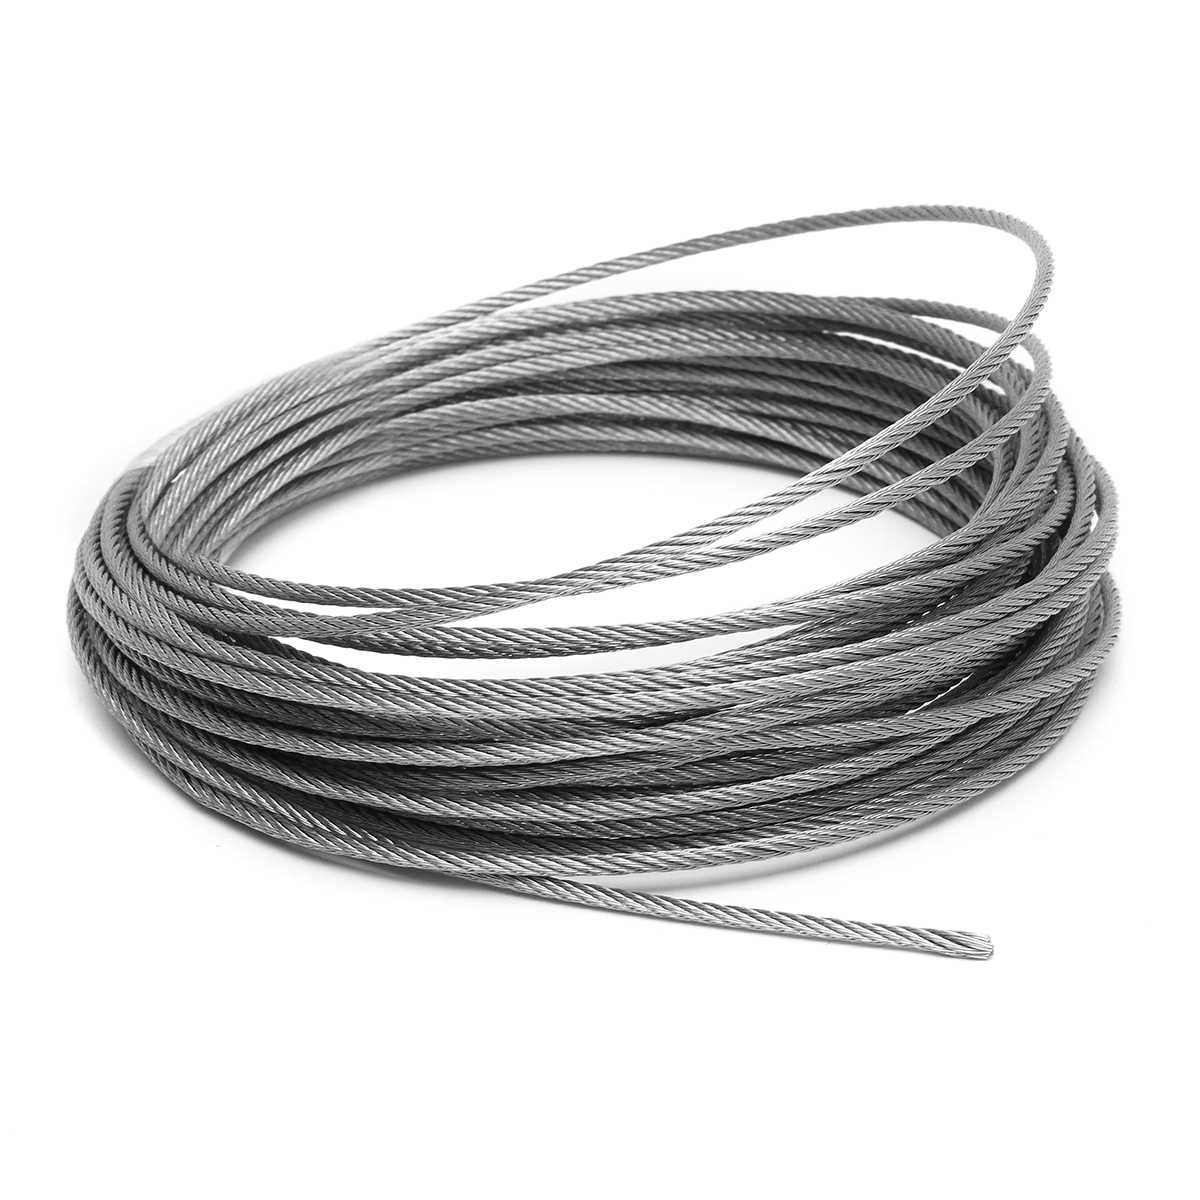 Buy Steel wire and Steel cable